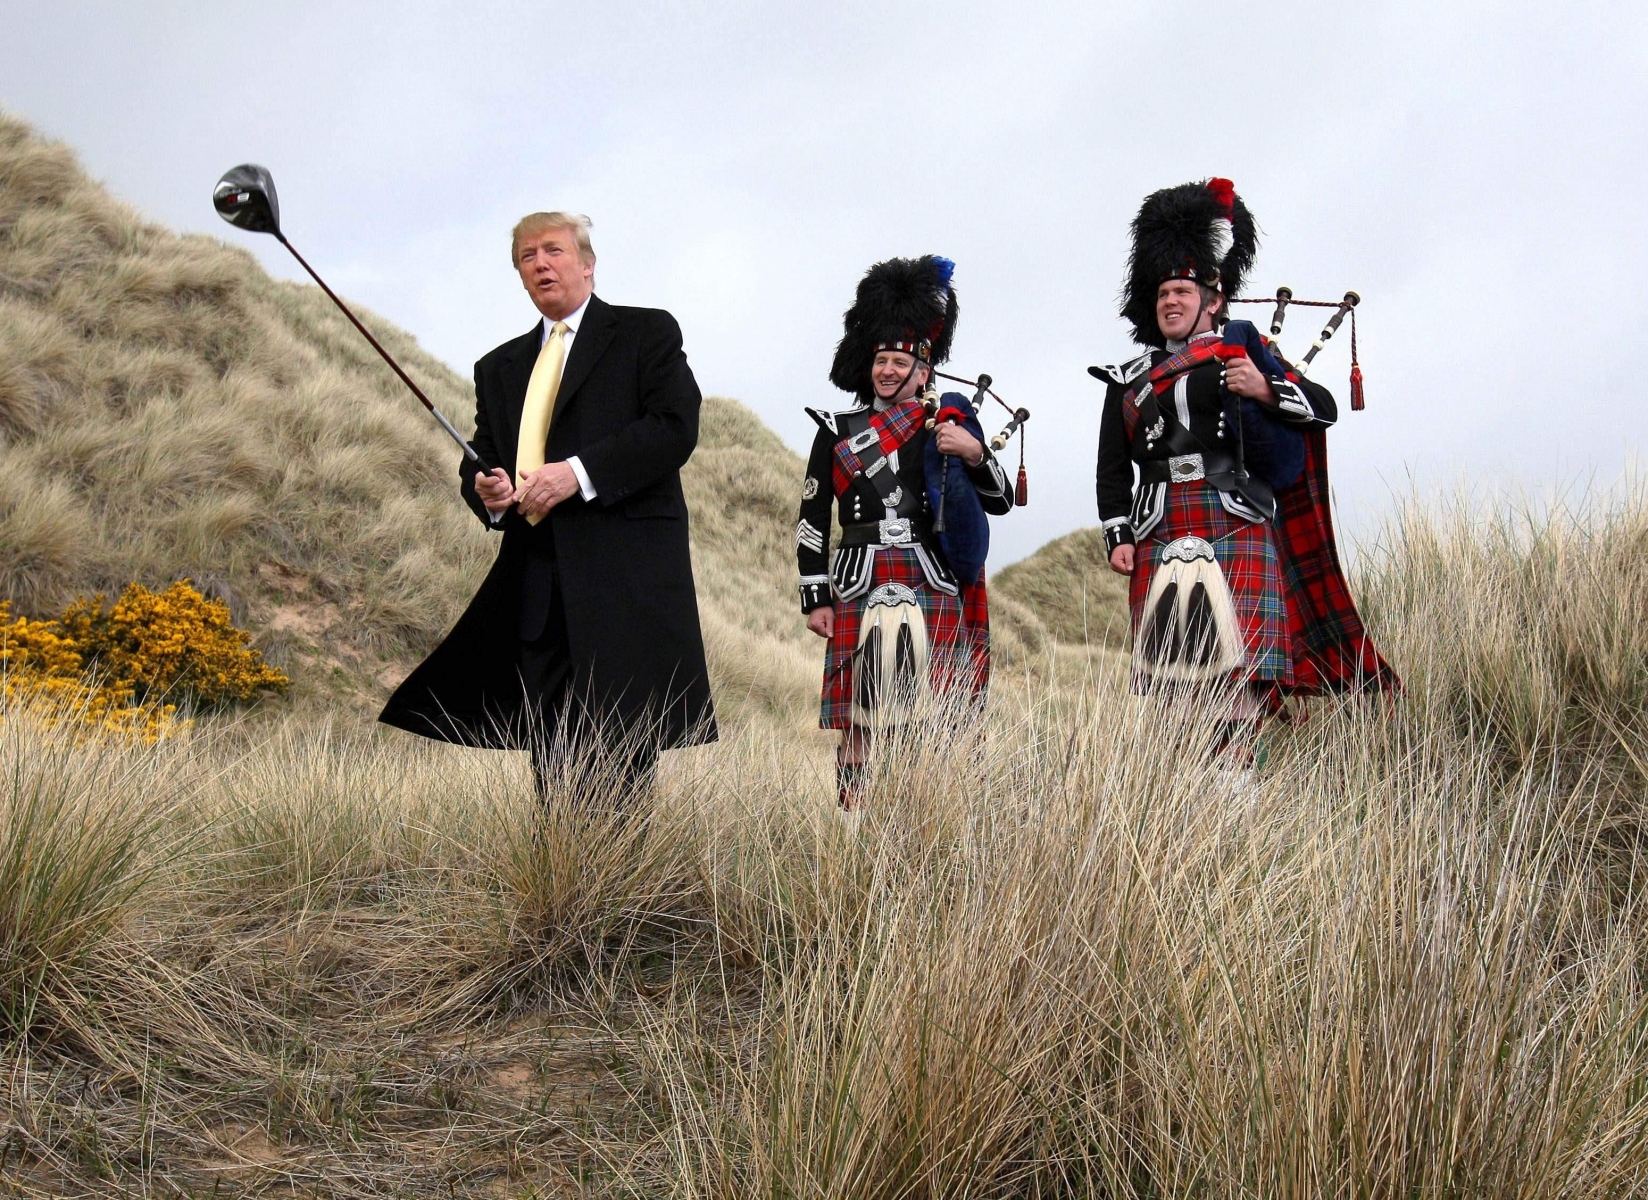 US billionaire Donald Trump swings a golf club in the sand dunes of the Menie Estate, on the Aberdeenshire coast, Scotland Thursday May 27, 2010, the location of his planned $1.5 billion Scottish golf resort. Protesters opposed to Trump's planned luxury resort say they've pulled a trick shot out of their bag. At the center of the plan is local fisherman Michael Forbes, who has long been an irritant to Trump. Forbes has refused the American tycoon's offer of nearly $700,000 (488,000 pounds) to buy his family's 23-acre run-down farm, which sits at the center of the planned resort. But Forbes has sold an acre of his land near Aberdeen to protesters who also disagree with Trump's plans _ a sale which will force the property tycoon to face down more than 60 people.   (AP Photo/Andrew Milligan/PA Wire)  ** UNITED KINGDOM OUT NO SALES NO ARCHIVE  ** Britain Trump